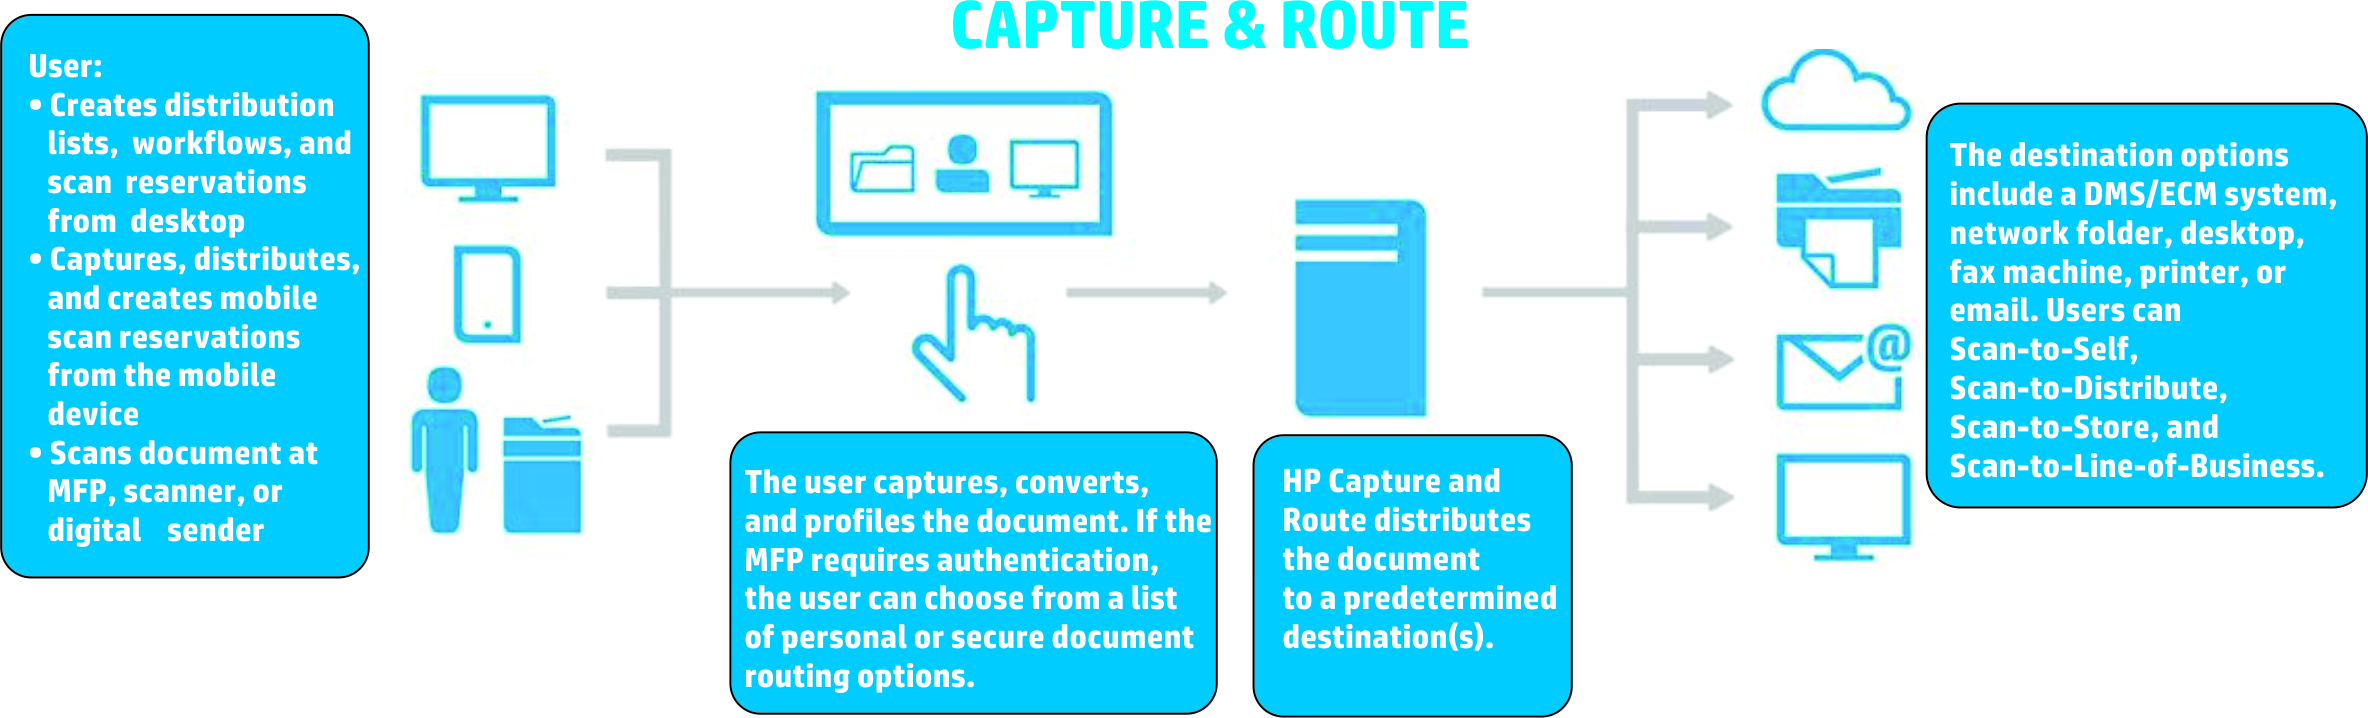 HP Capture and Route